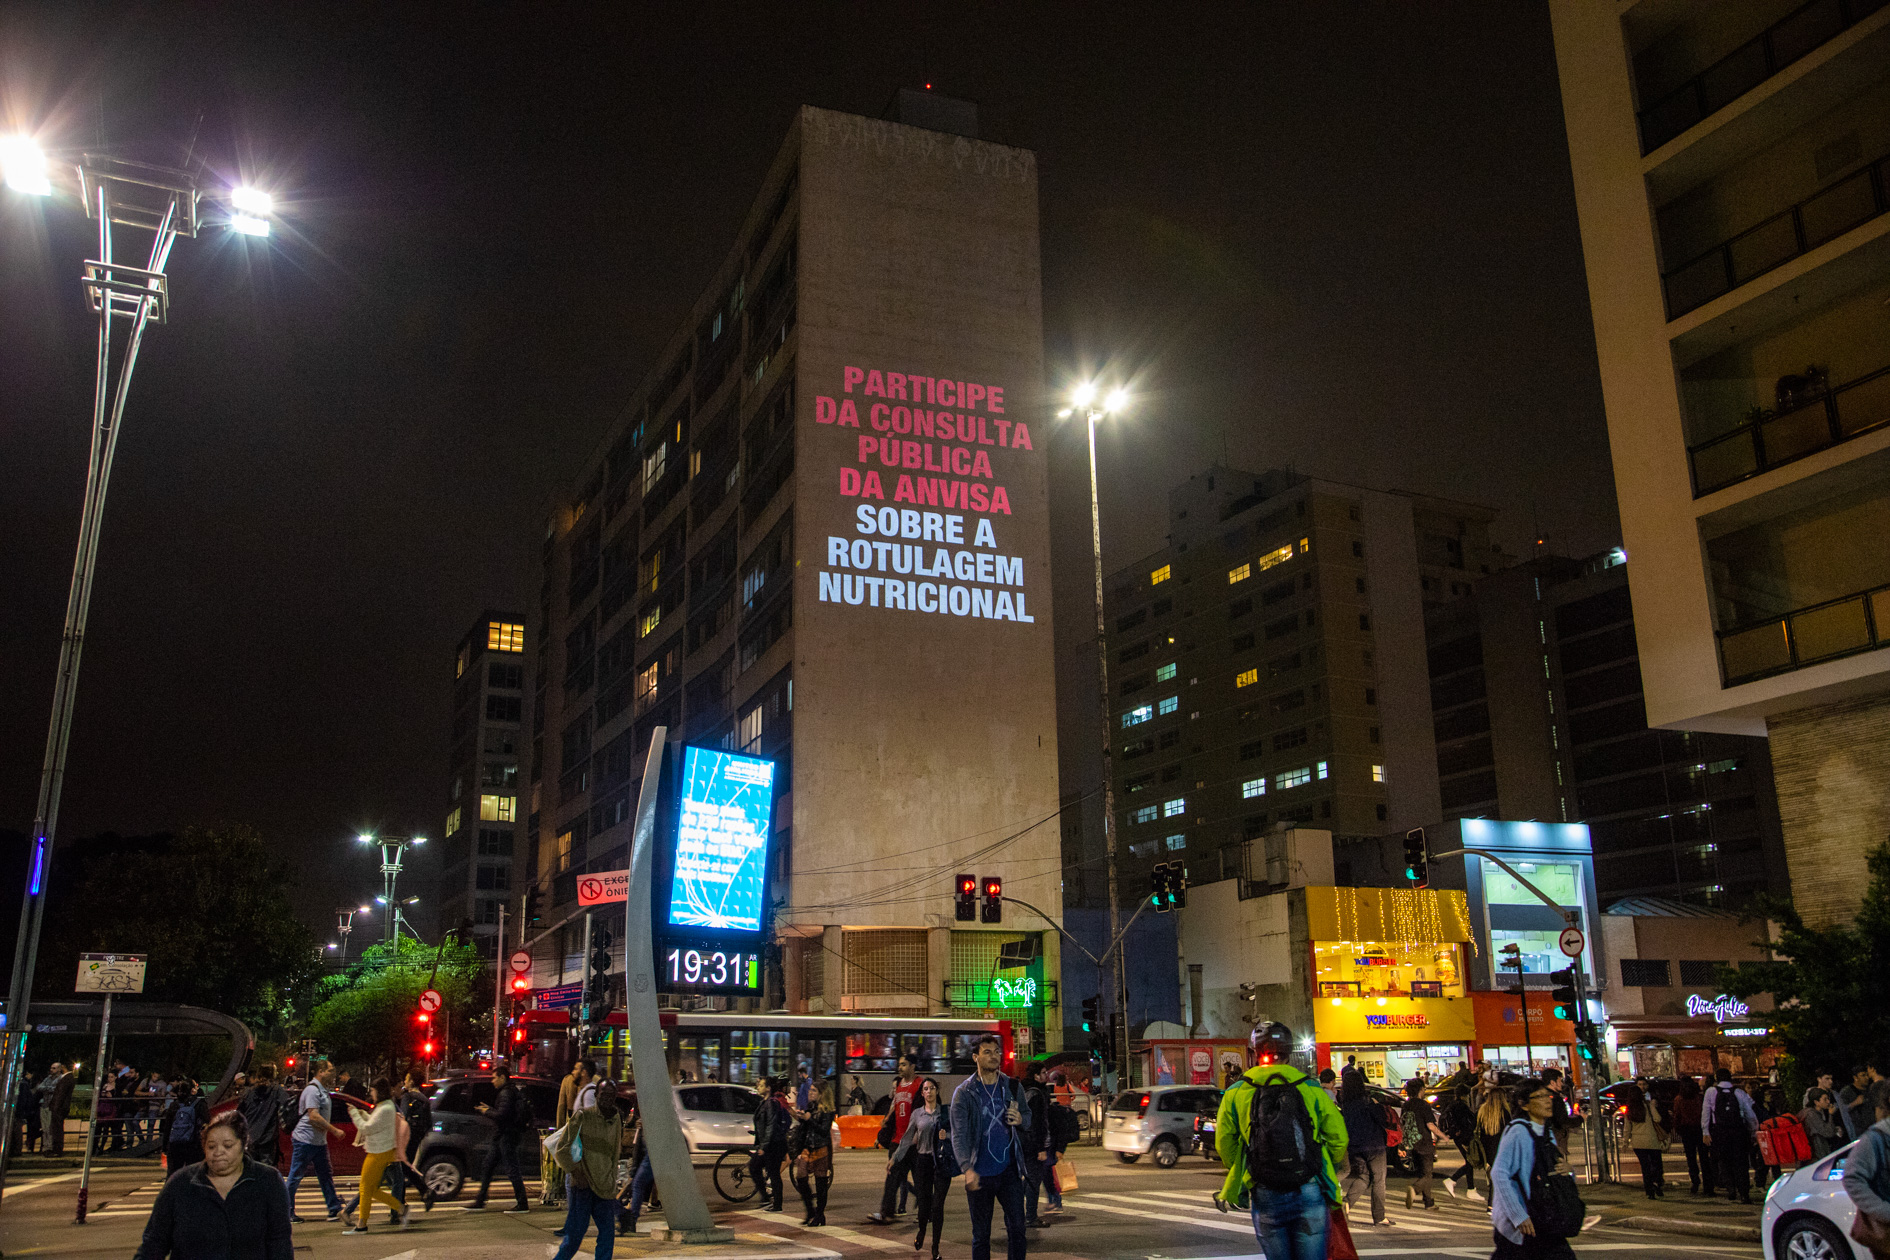 Video Mapping along a main street in São Paulo, with the text “Take part in Anvisa's public consultation about nutritional labeling”. Source: Idec